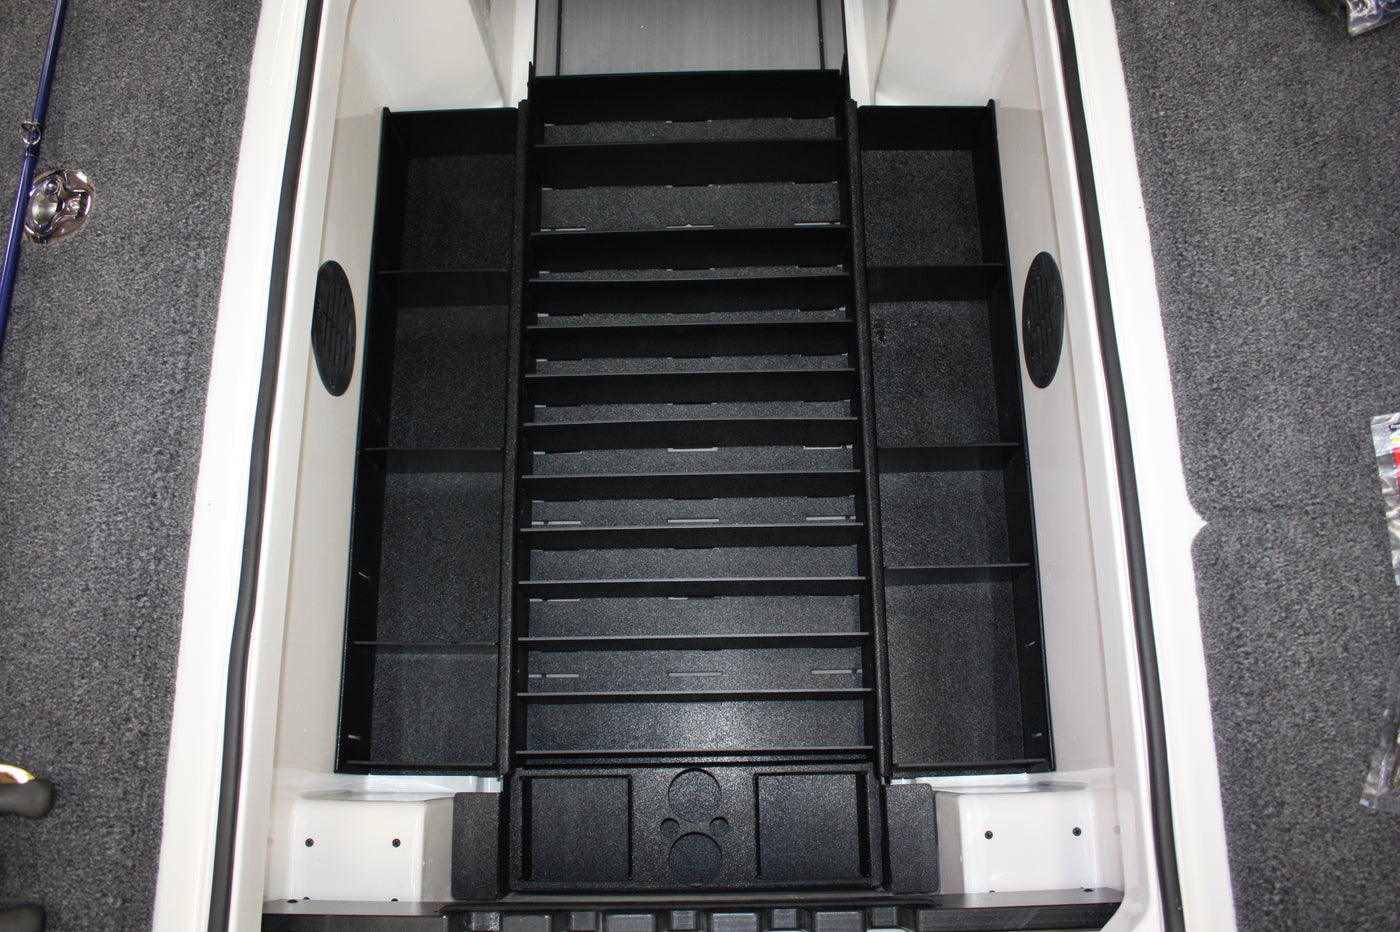 NPDRANG0015 2023 Ranger® Z521 / 520 R FRONT DECK CENTER COMPARTMENT TACKLE STORAGE TRAY SYSTEM